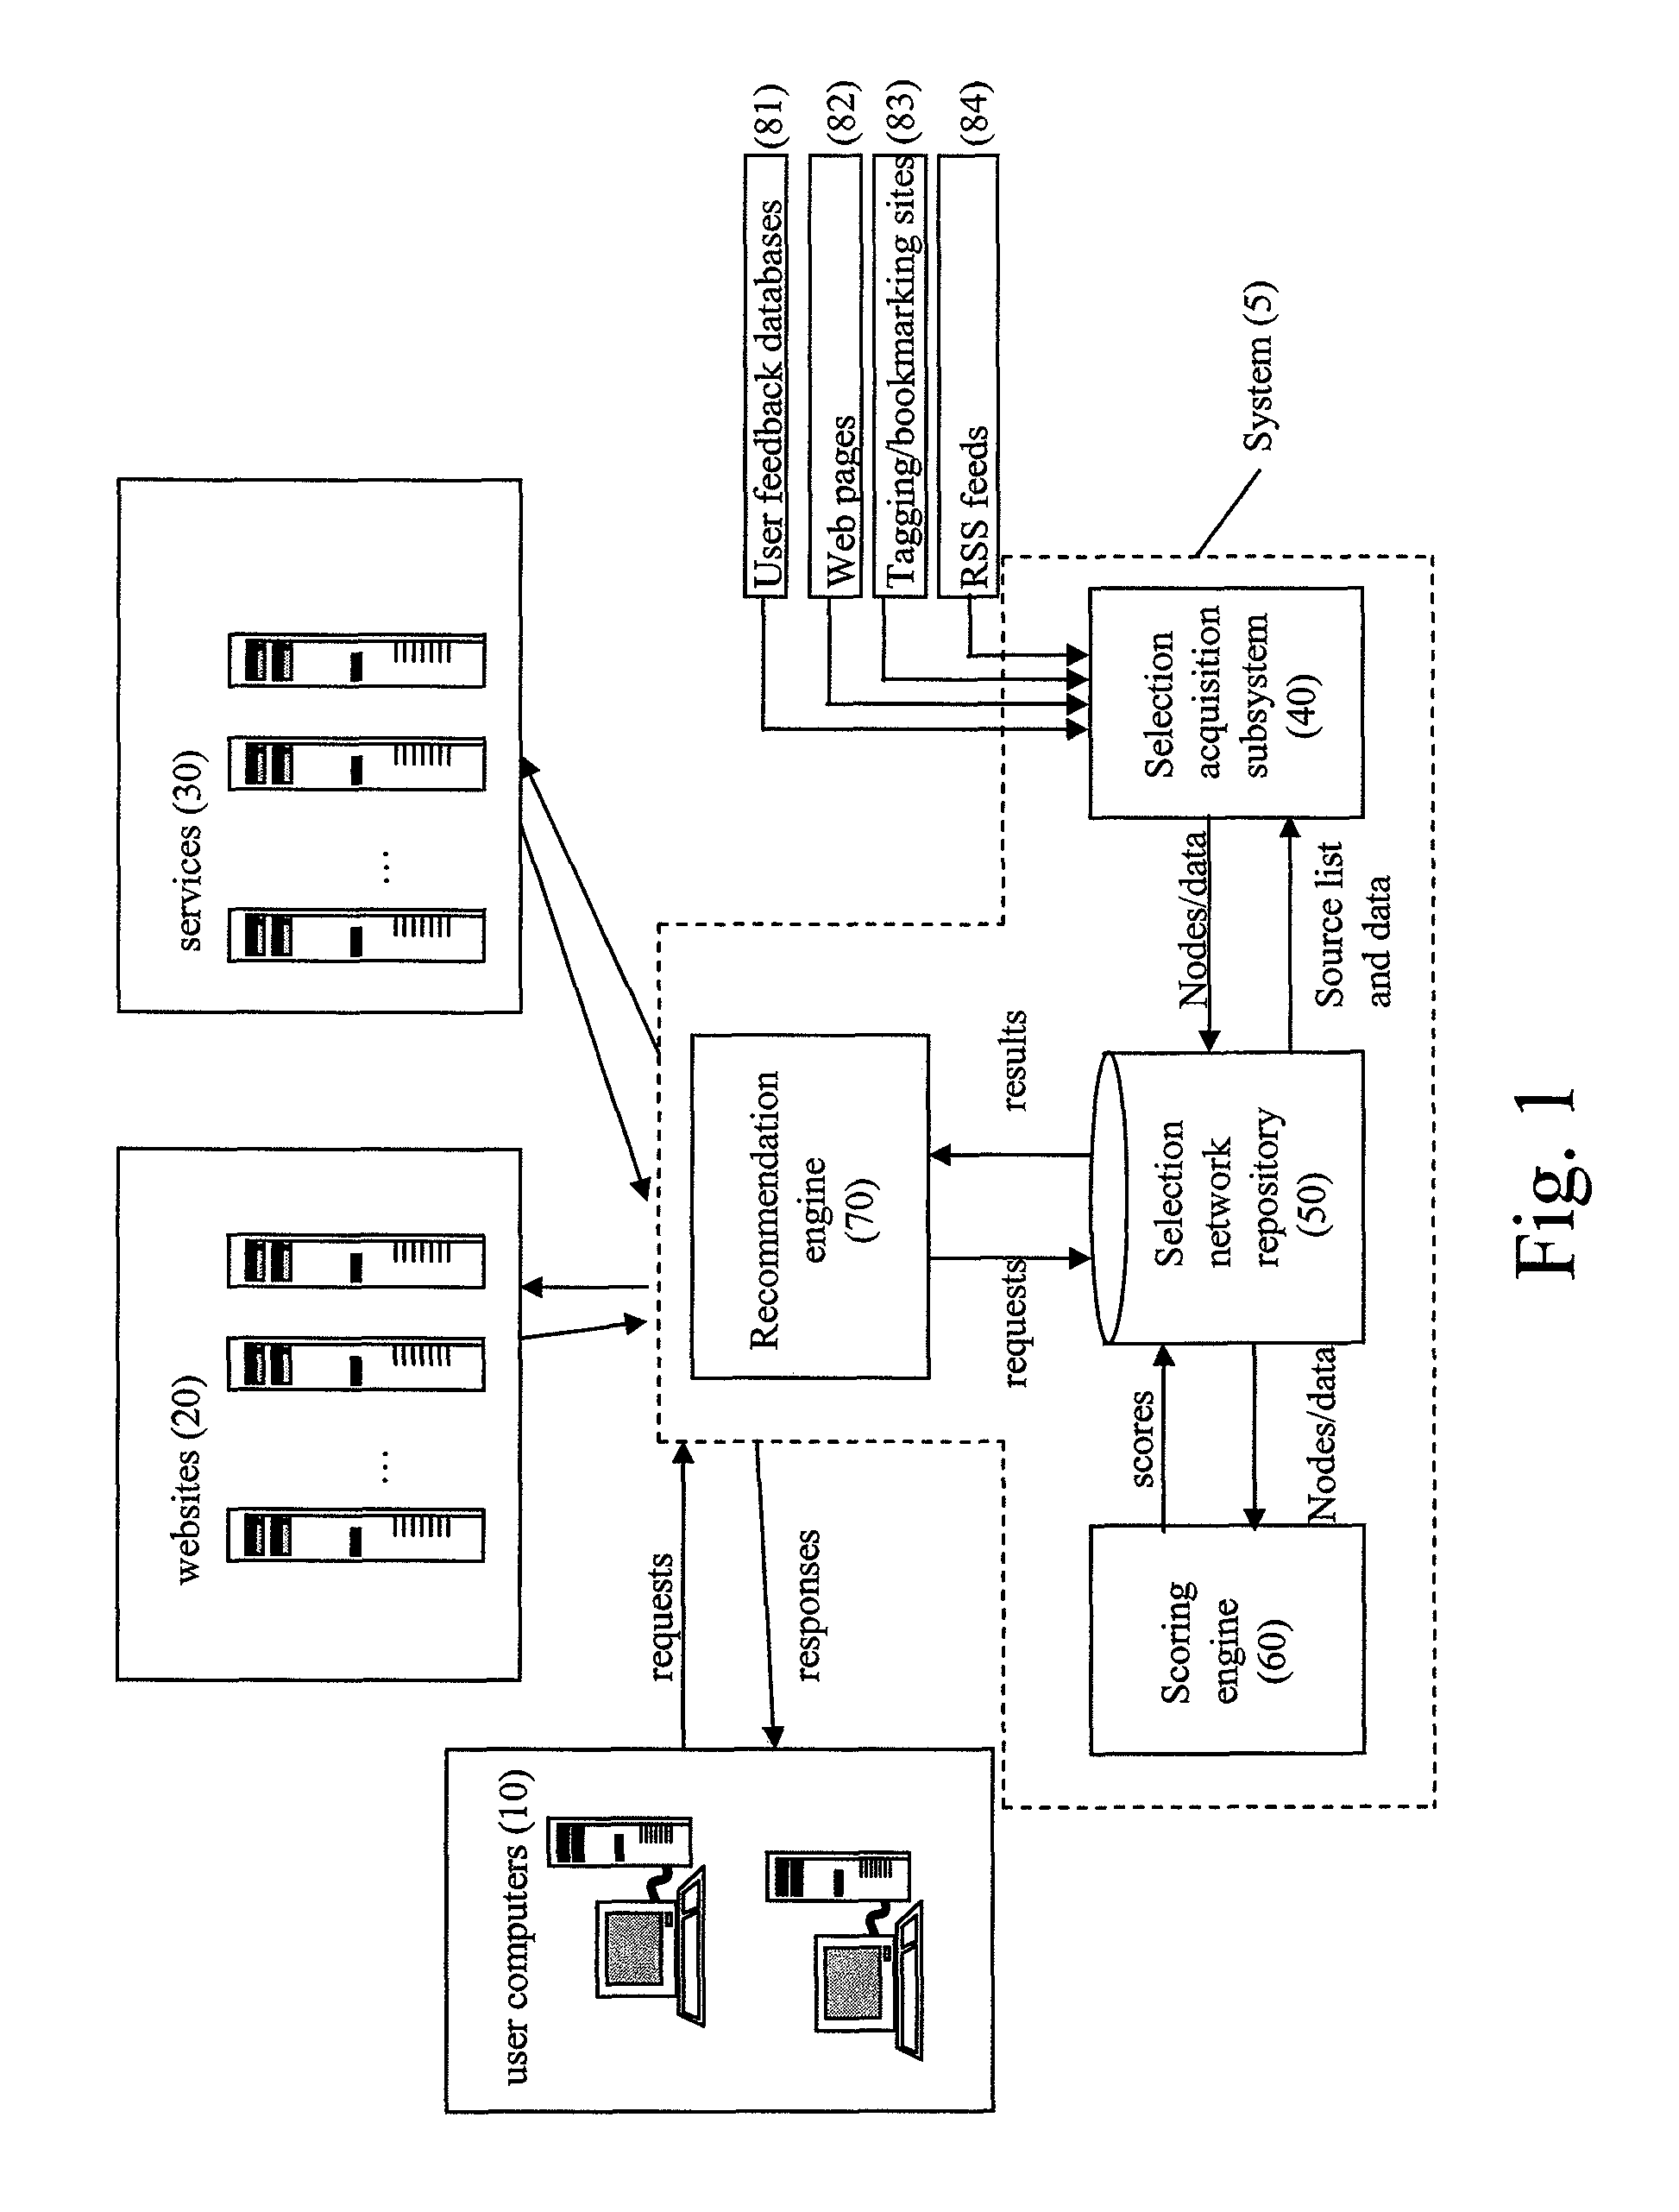 System and method for generating sources of prioritized content